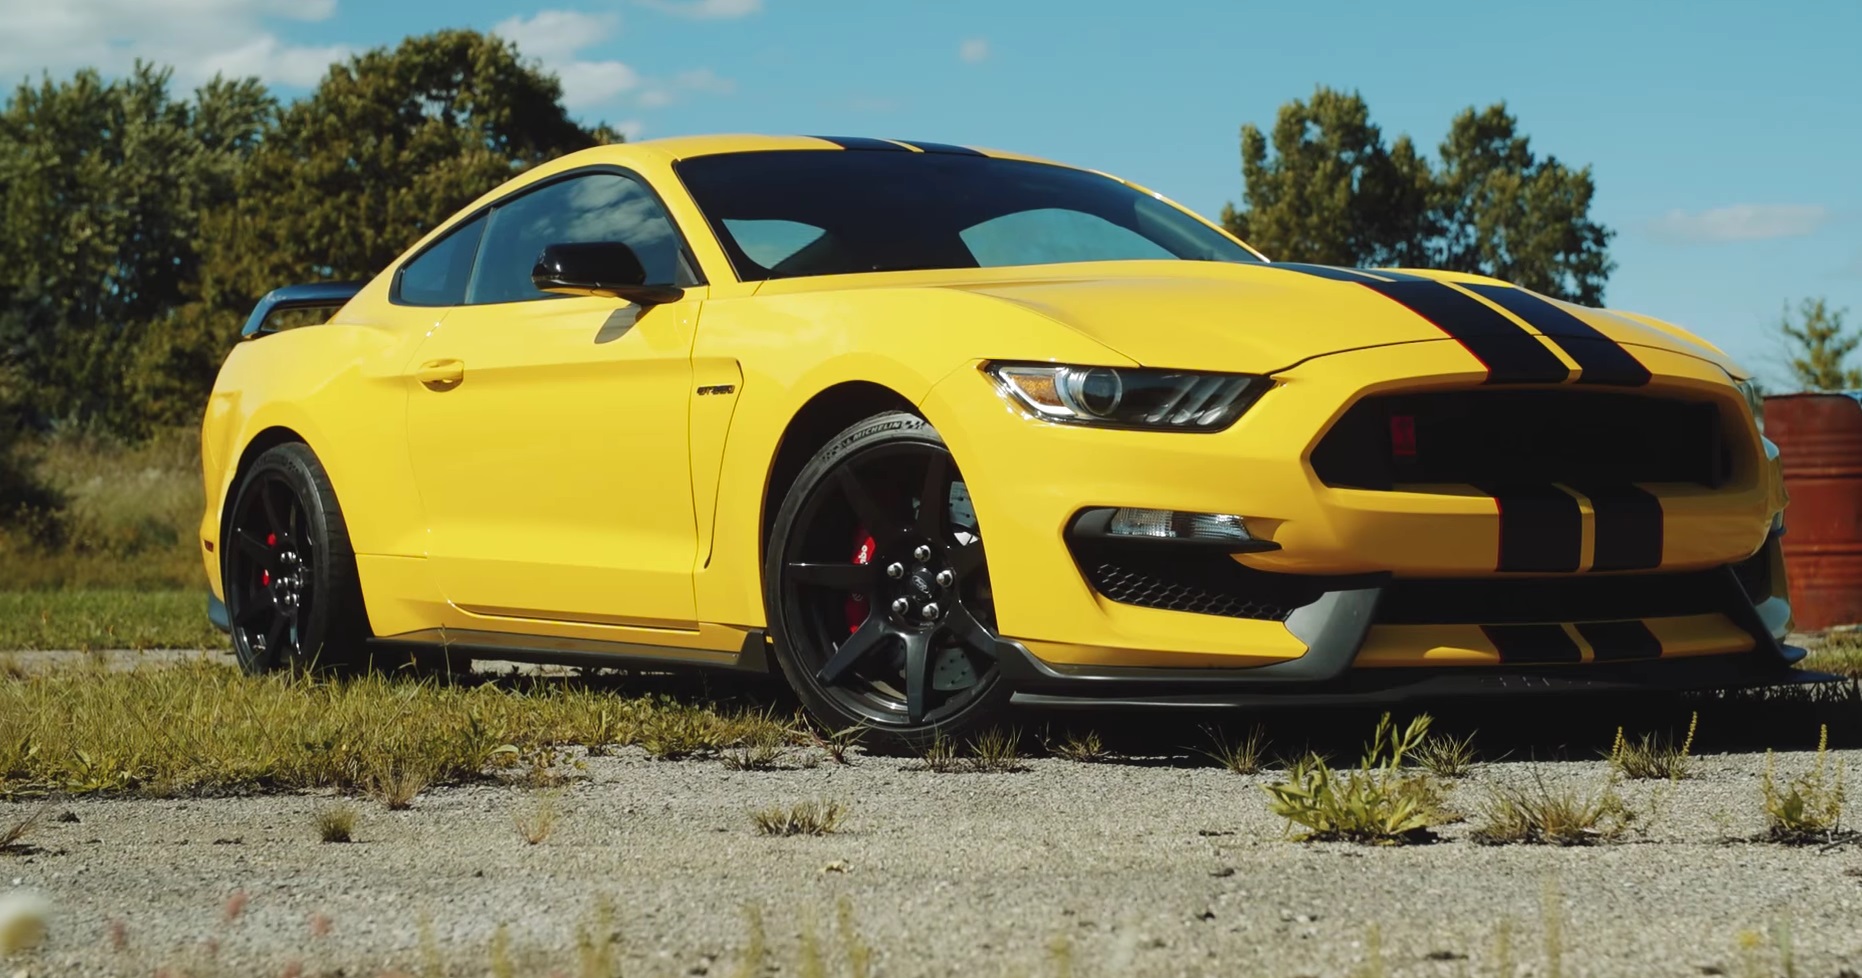 Video: Ford Mustang Shelby GT350R - Mustang Plus - Carfection